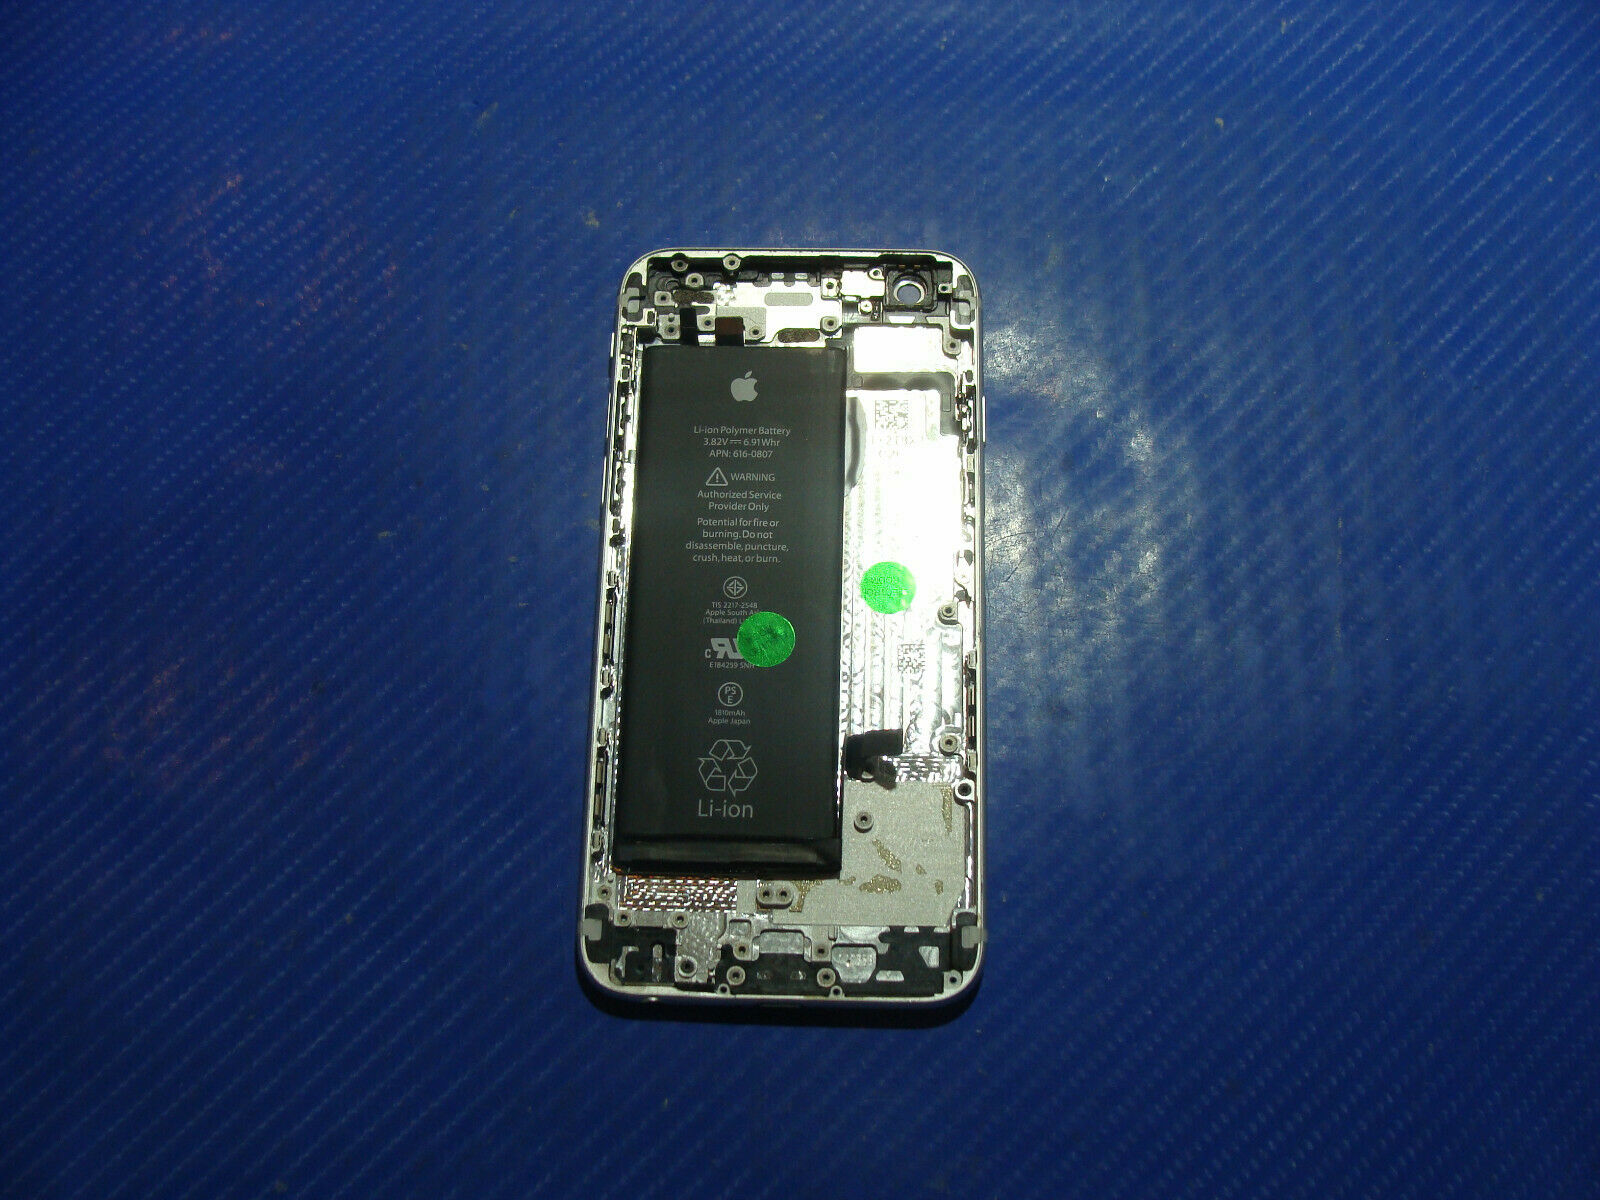 iPhone 6 A1549 4.7" MG4P2LL/A Genuine Back Cover w/ Battery GS65606 #3 Apple